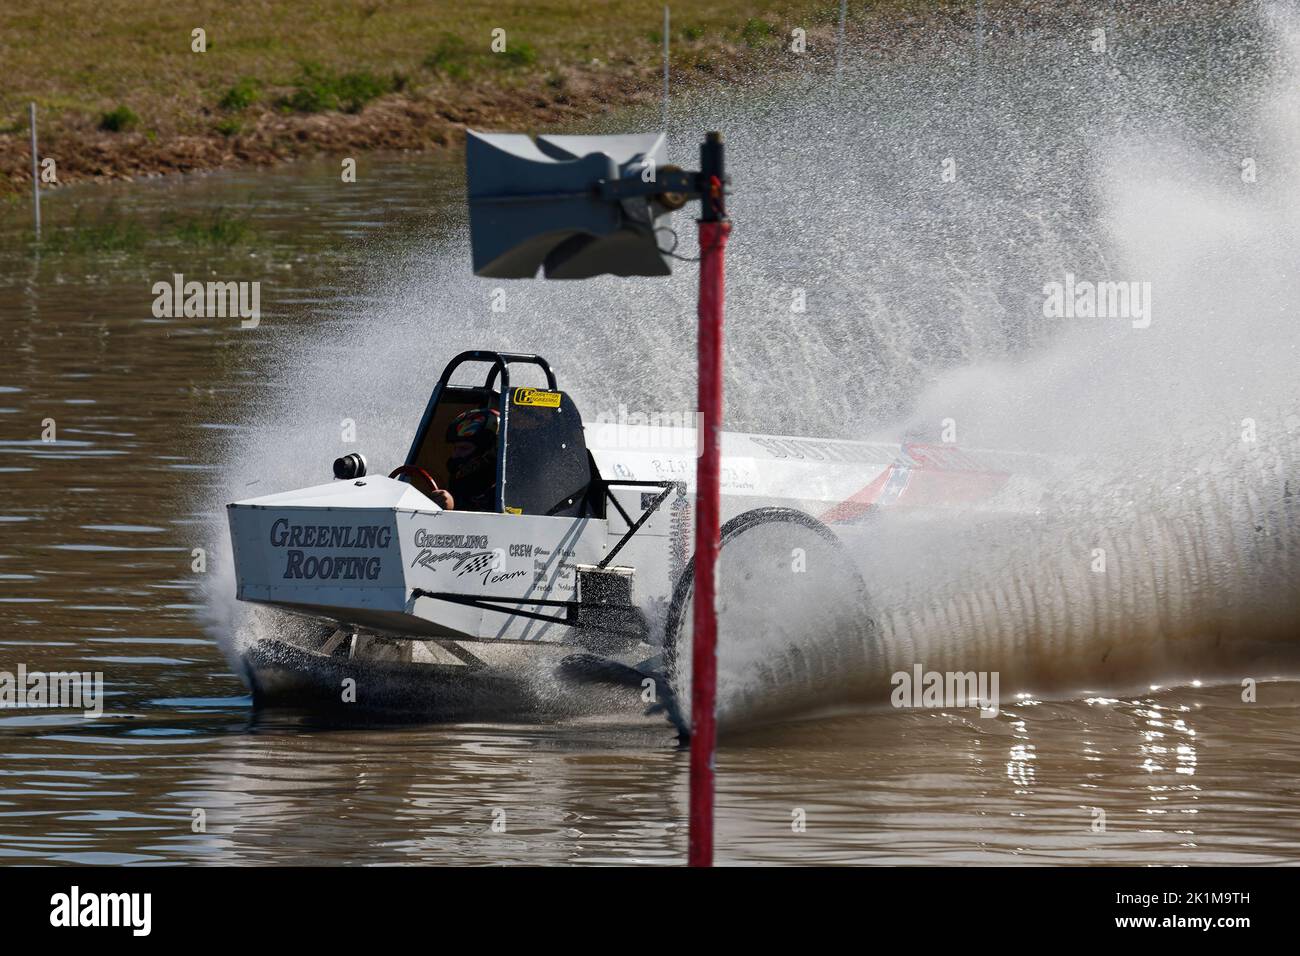 swamp buggy moving through water, action, close-up, large water spray, motion, jeep style, vehicle sport, Florida Sports Park, Naples, FL Stock Photo